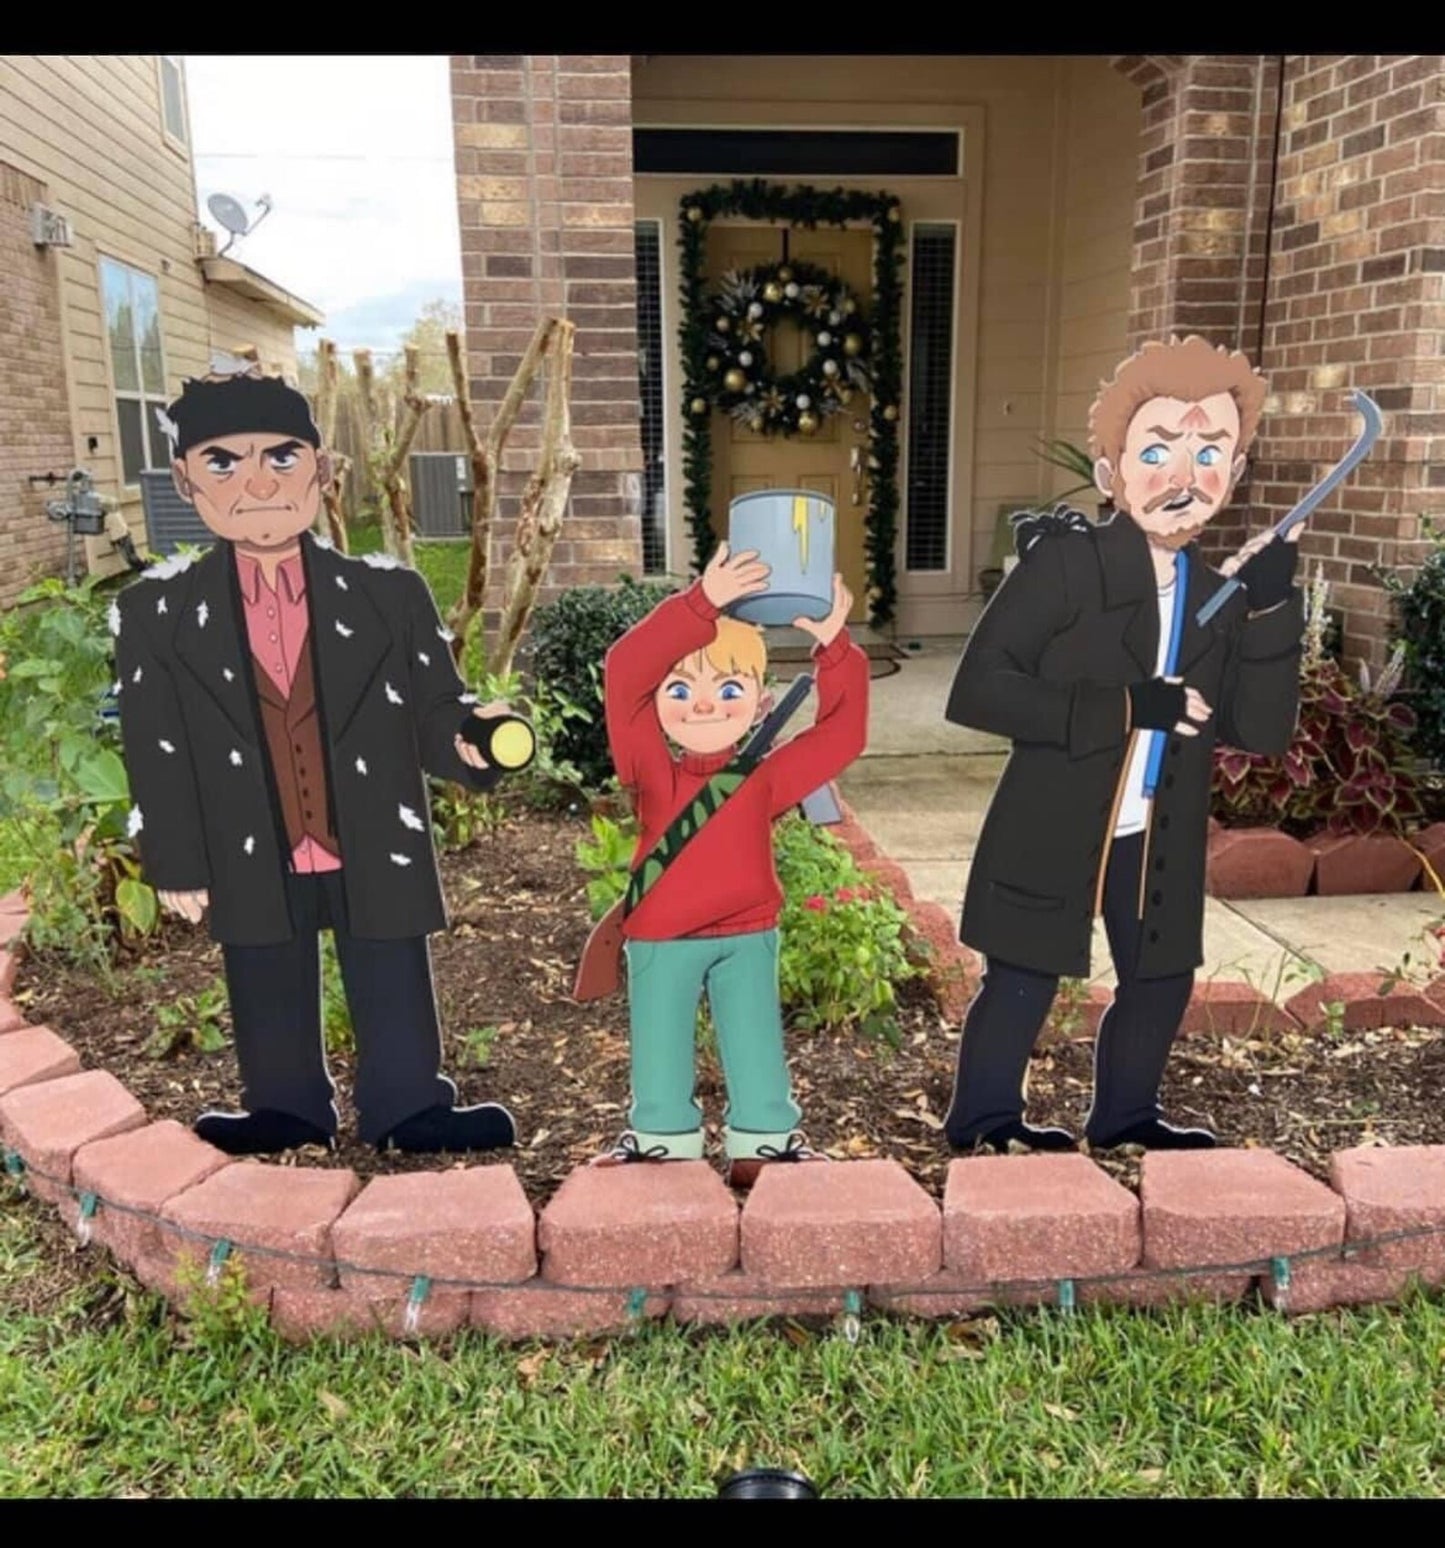 Home Alone themed movie cutouts over 4ft tall